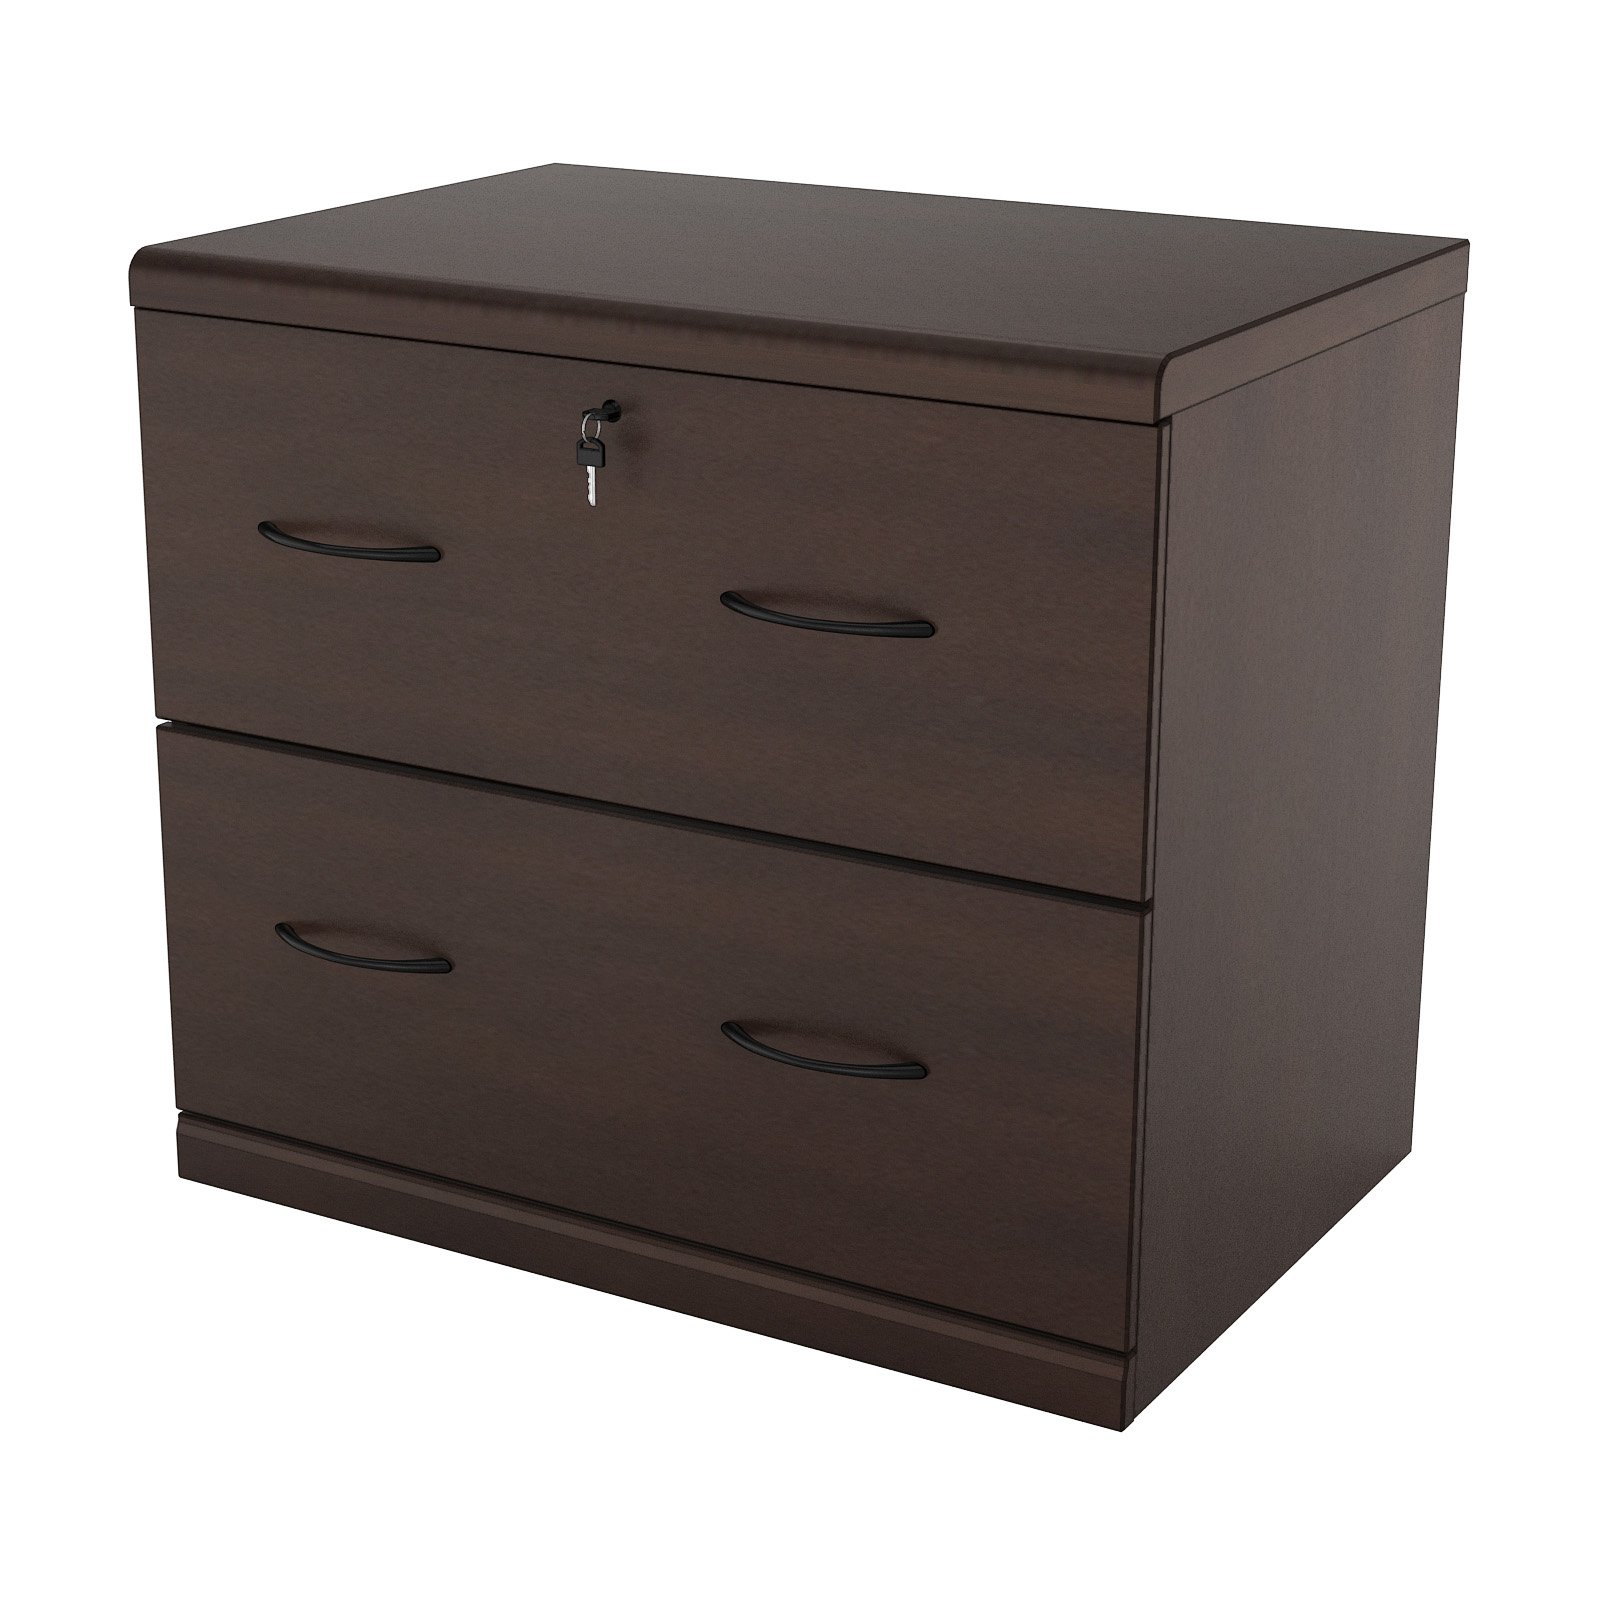 2 Drawer Lateral Wood Lockable Filing Cabinet Espresso Walmart within dimensions 1600 X 1600